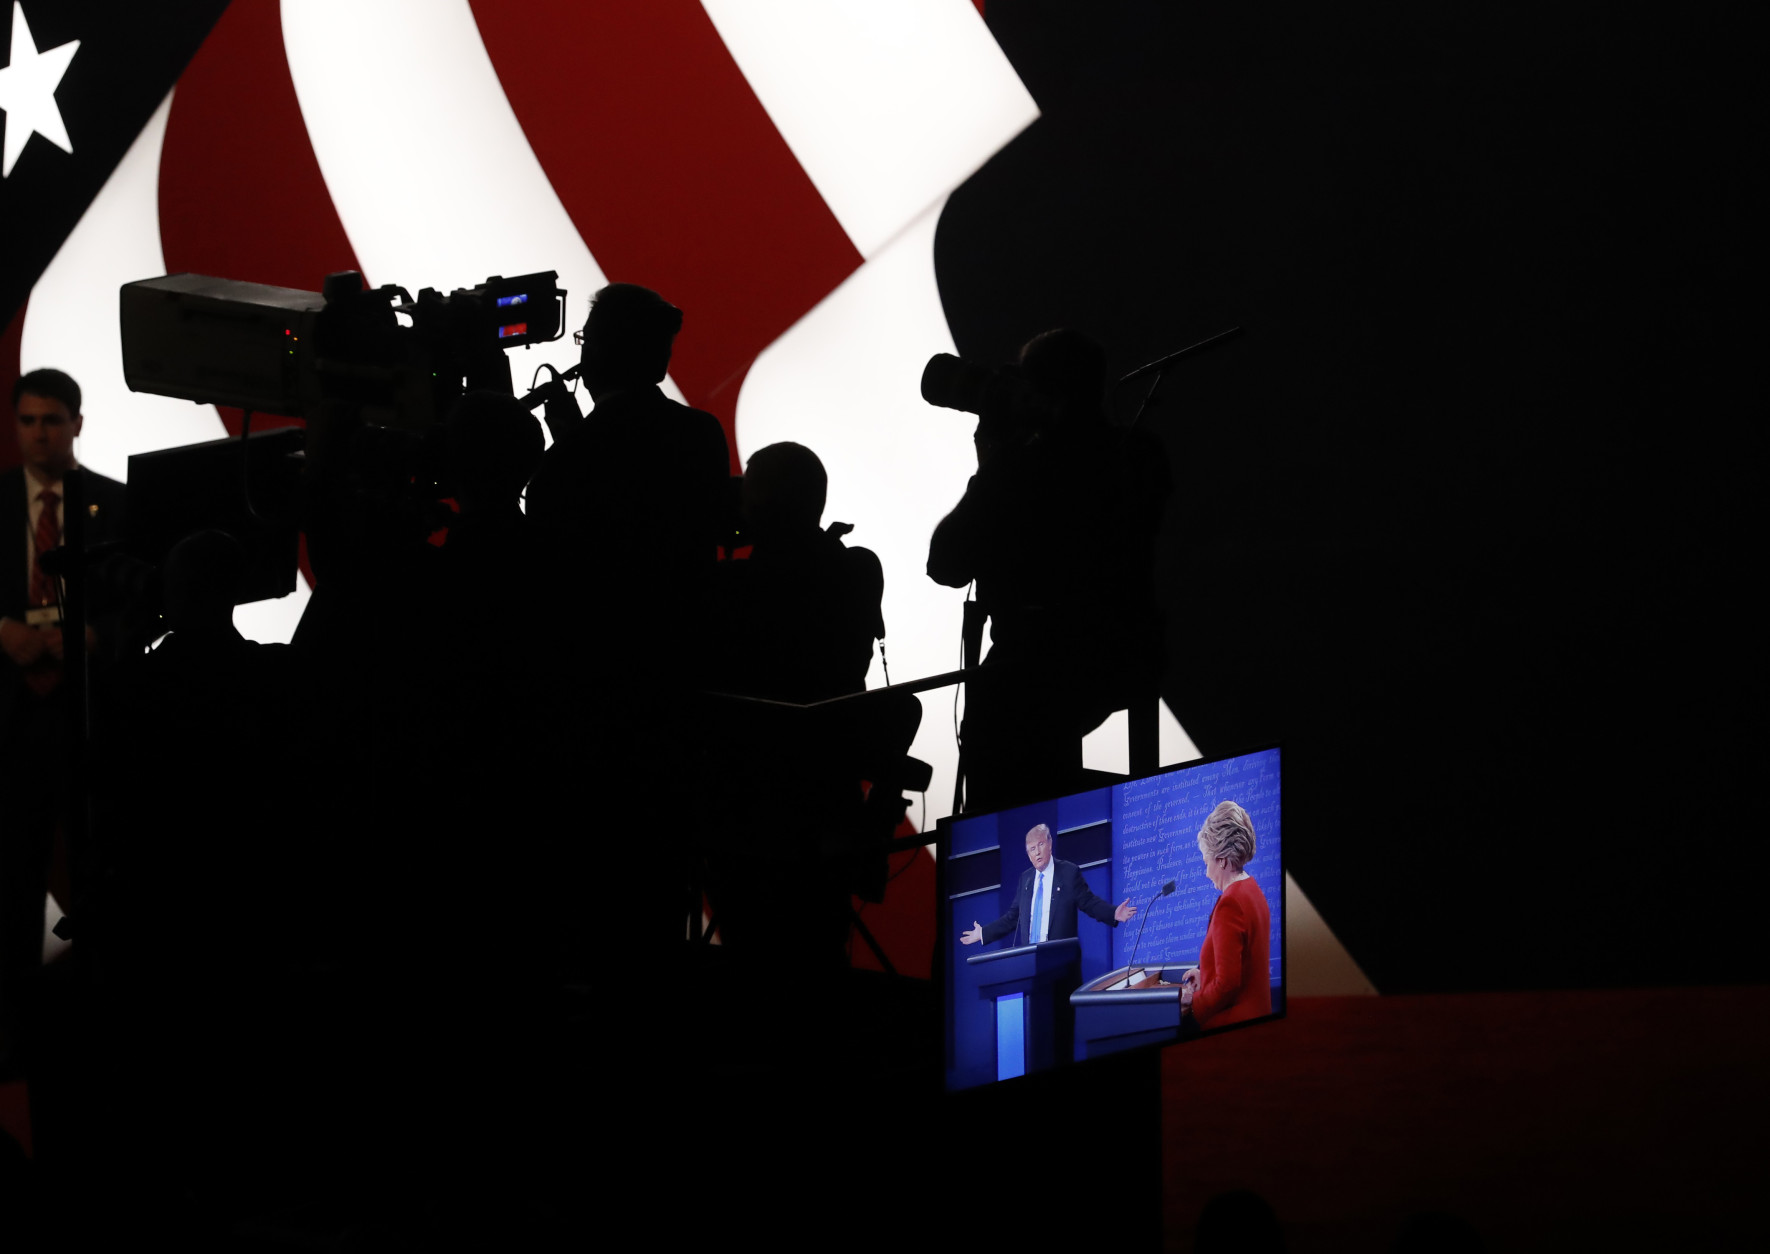 Democratic presidential nominee Hillary Clinton and Republican presidential nominee Donald Trump appear on a monitor during the presidential debate at Hofstra University in Hempstead, N.Y., Monday, Sept. 26, 2016. (AP Photo/Mary Altaffer)